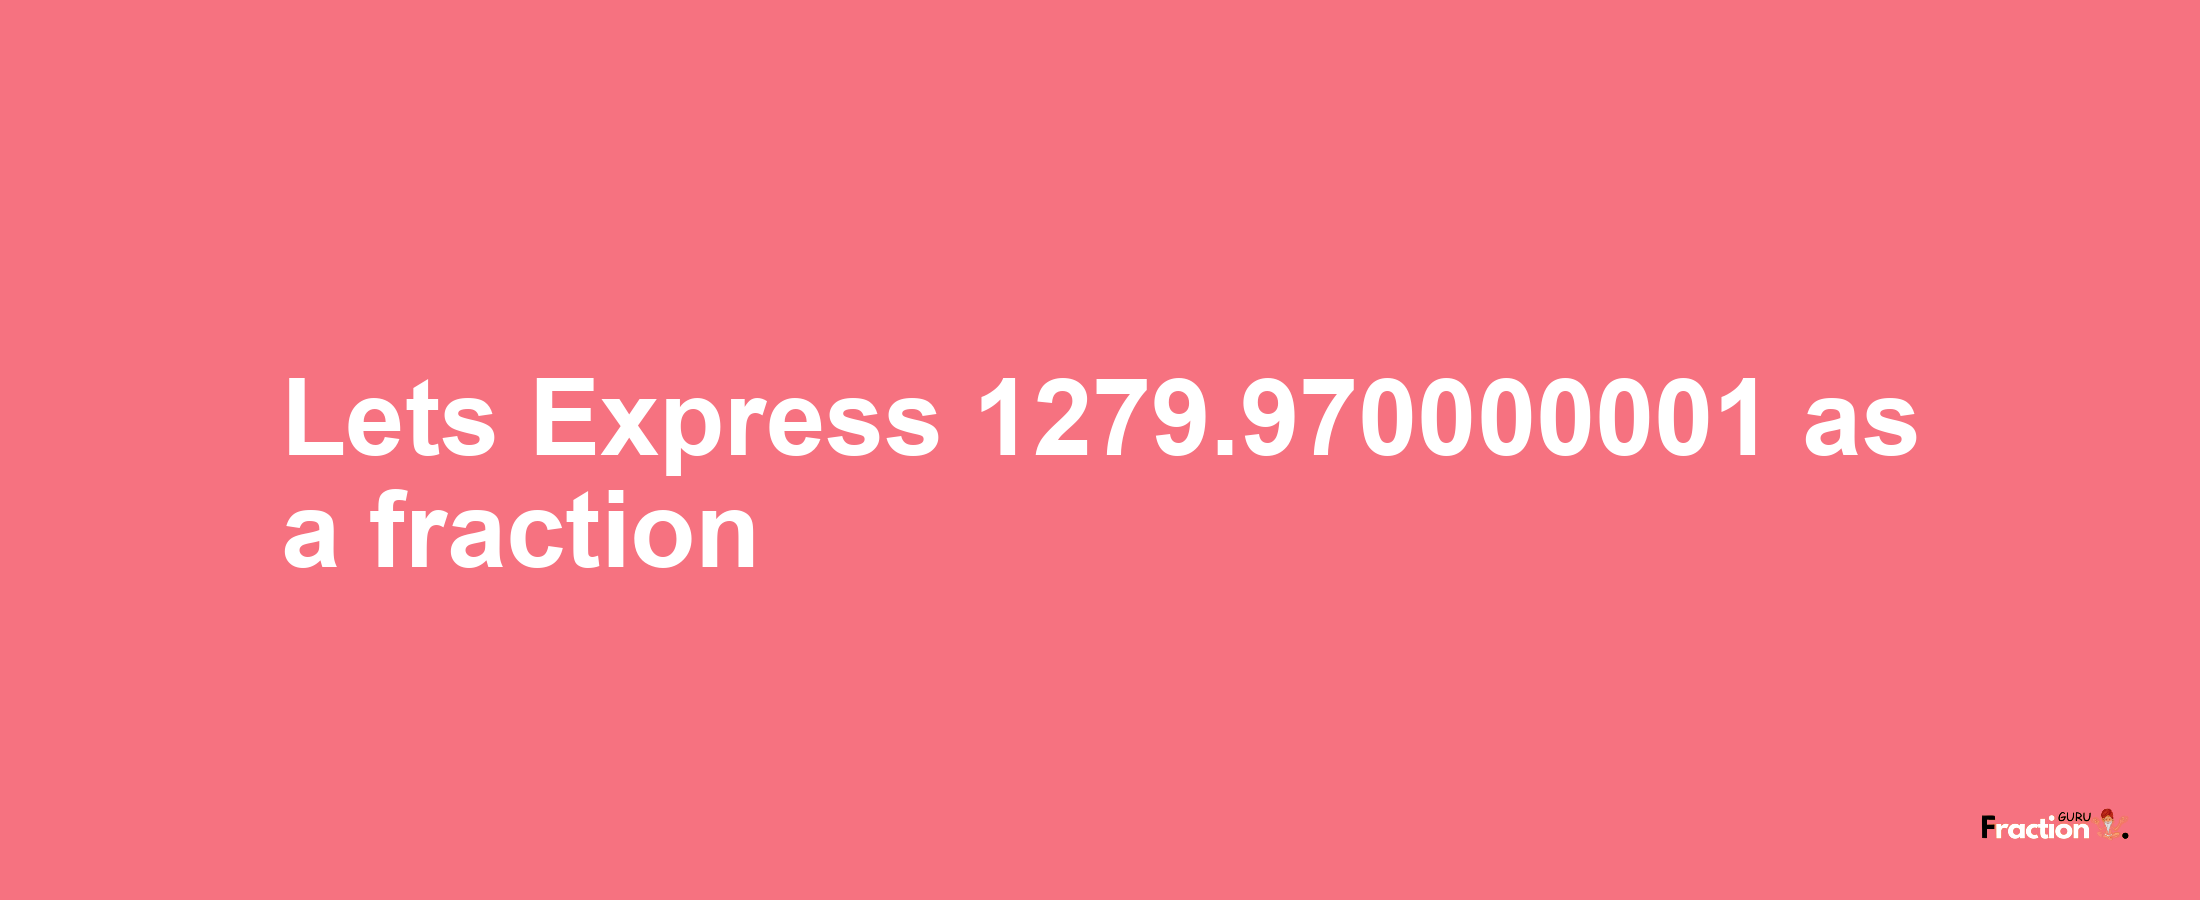 Lets Express 1279.970000001 as afraction